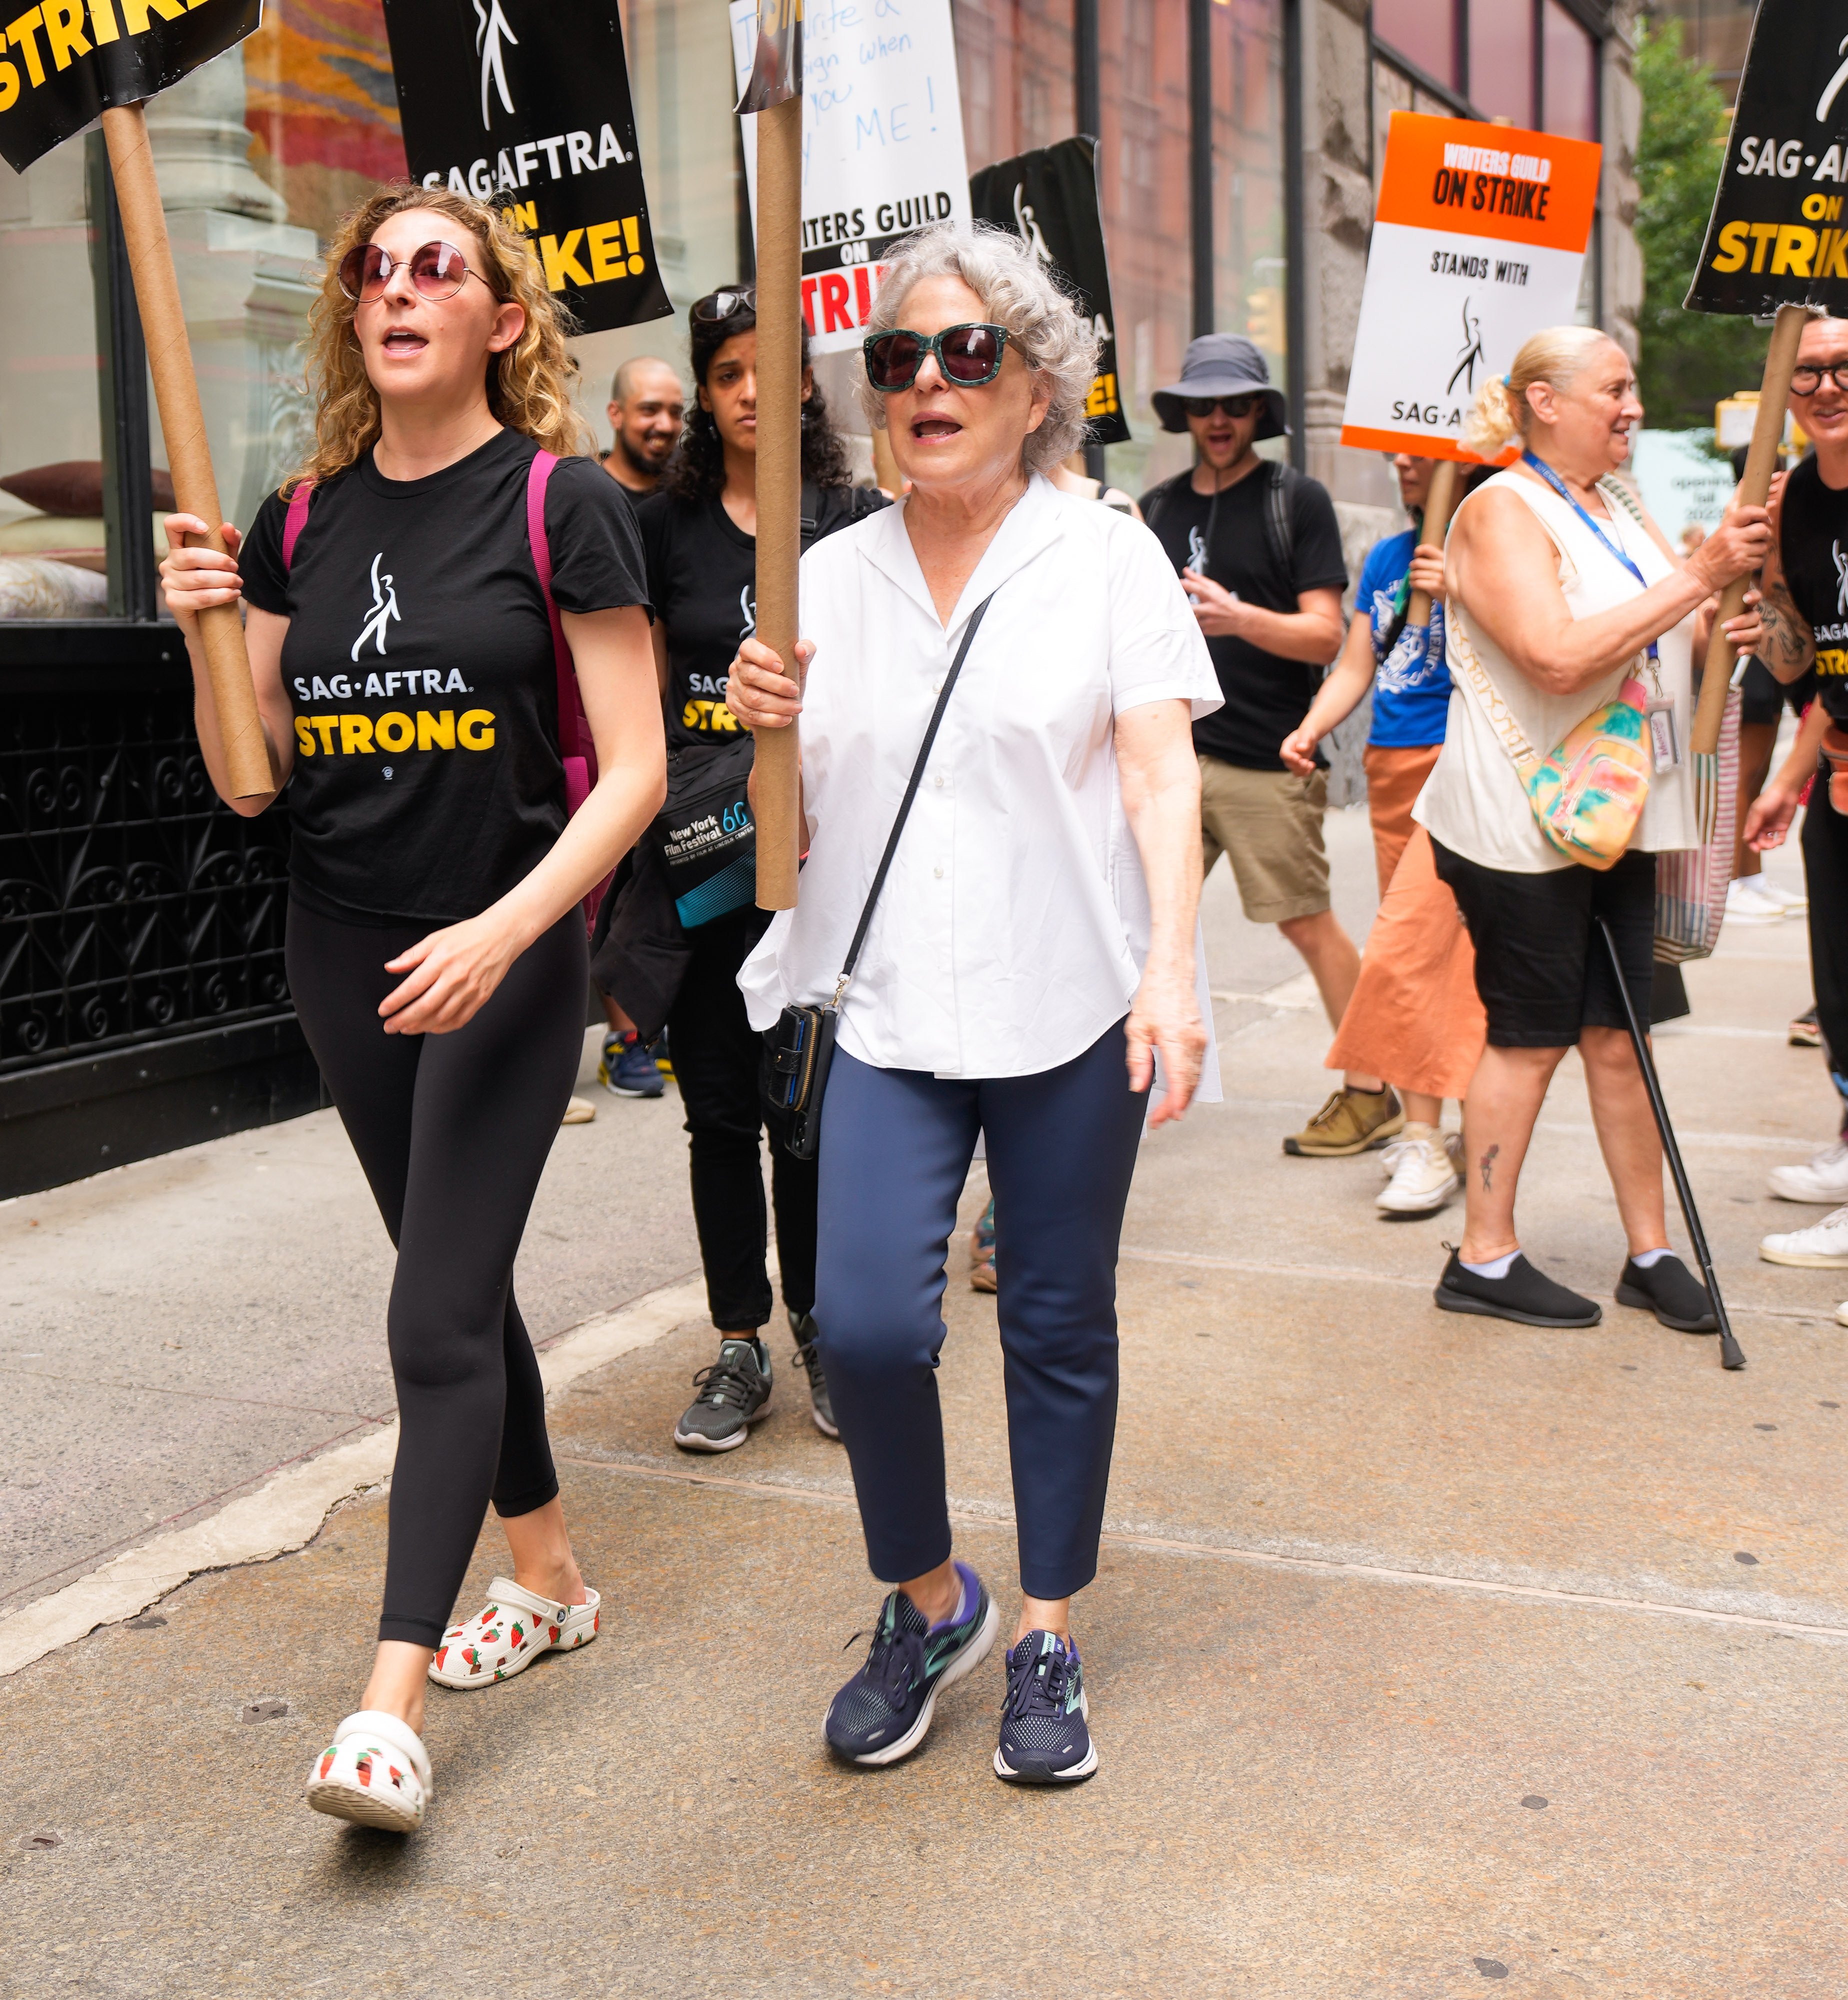 Sophie von Haselberg and Bette Midler picketing on the streets for the SAG-AFTRA strike in New York City, 2023 | Source: Getty Images